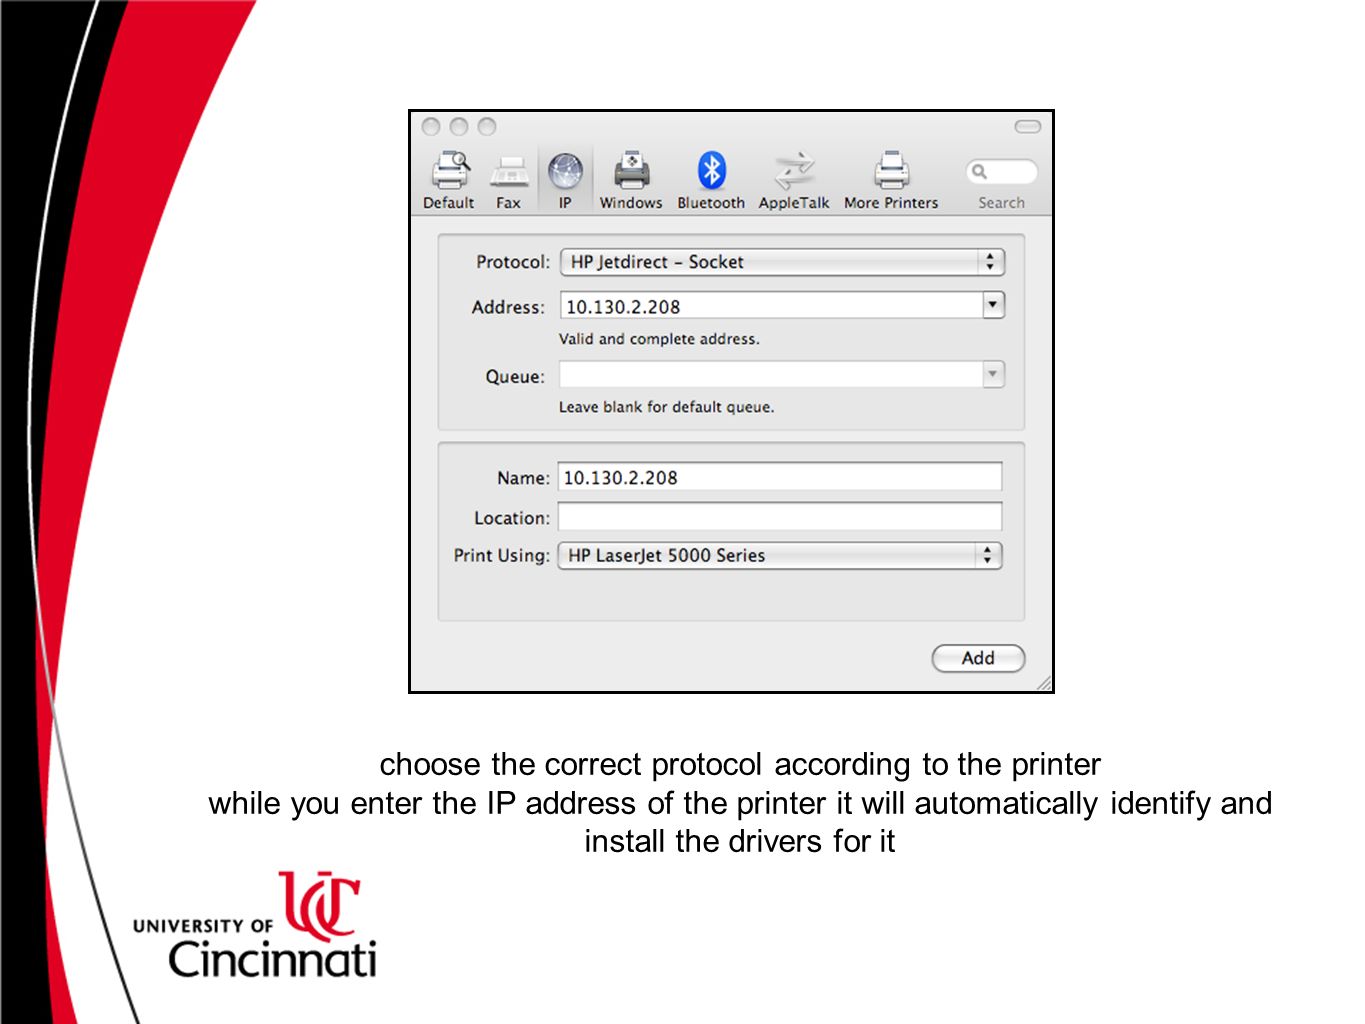 choose the correct protocol according to the printer while you enter the IP address of the printer it will automatically identify and install the drivers for it